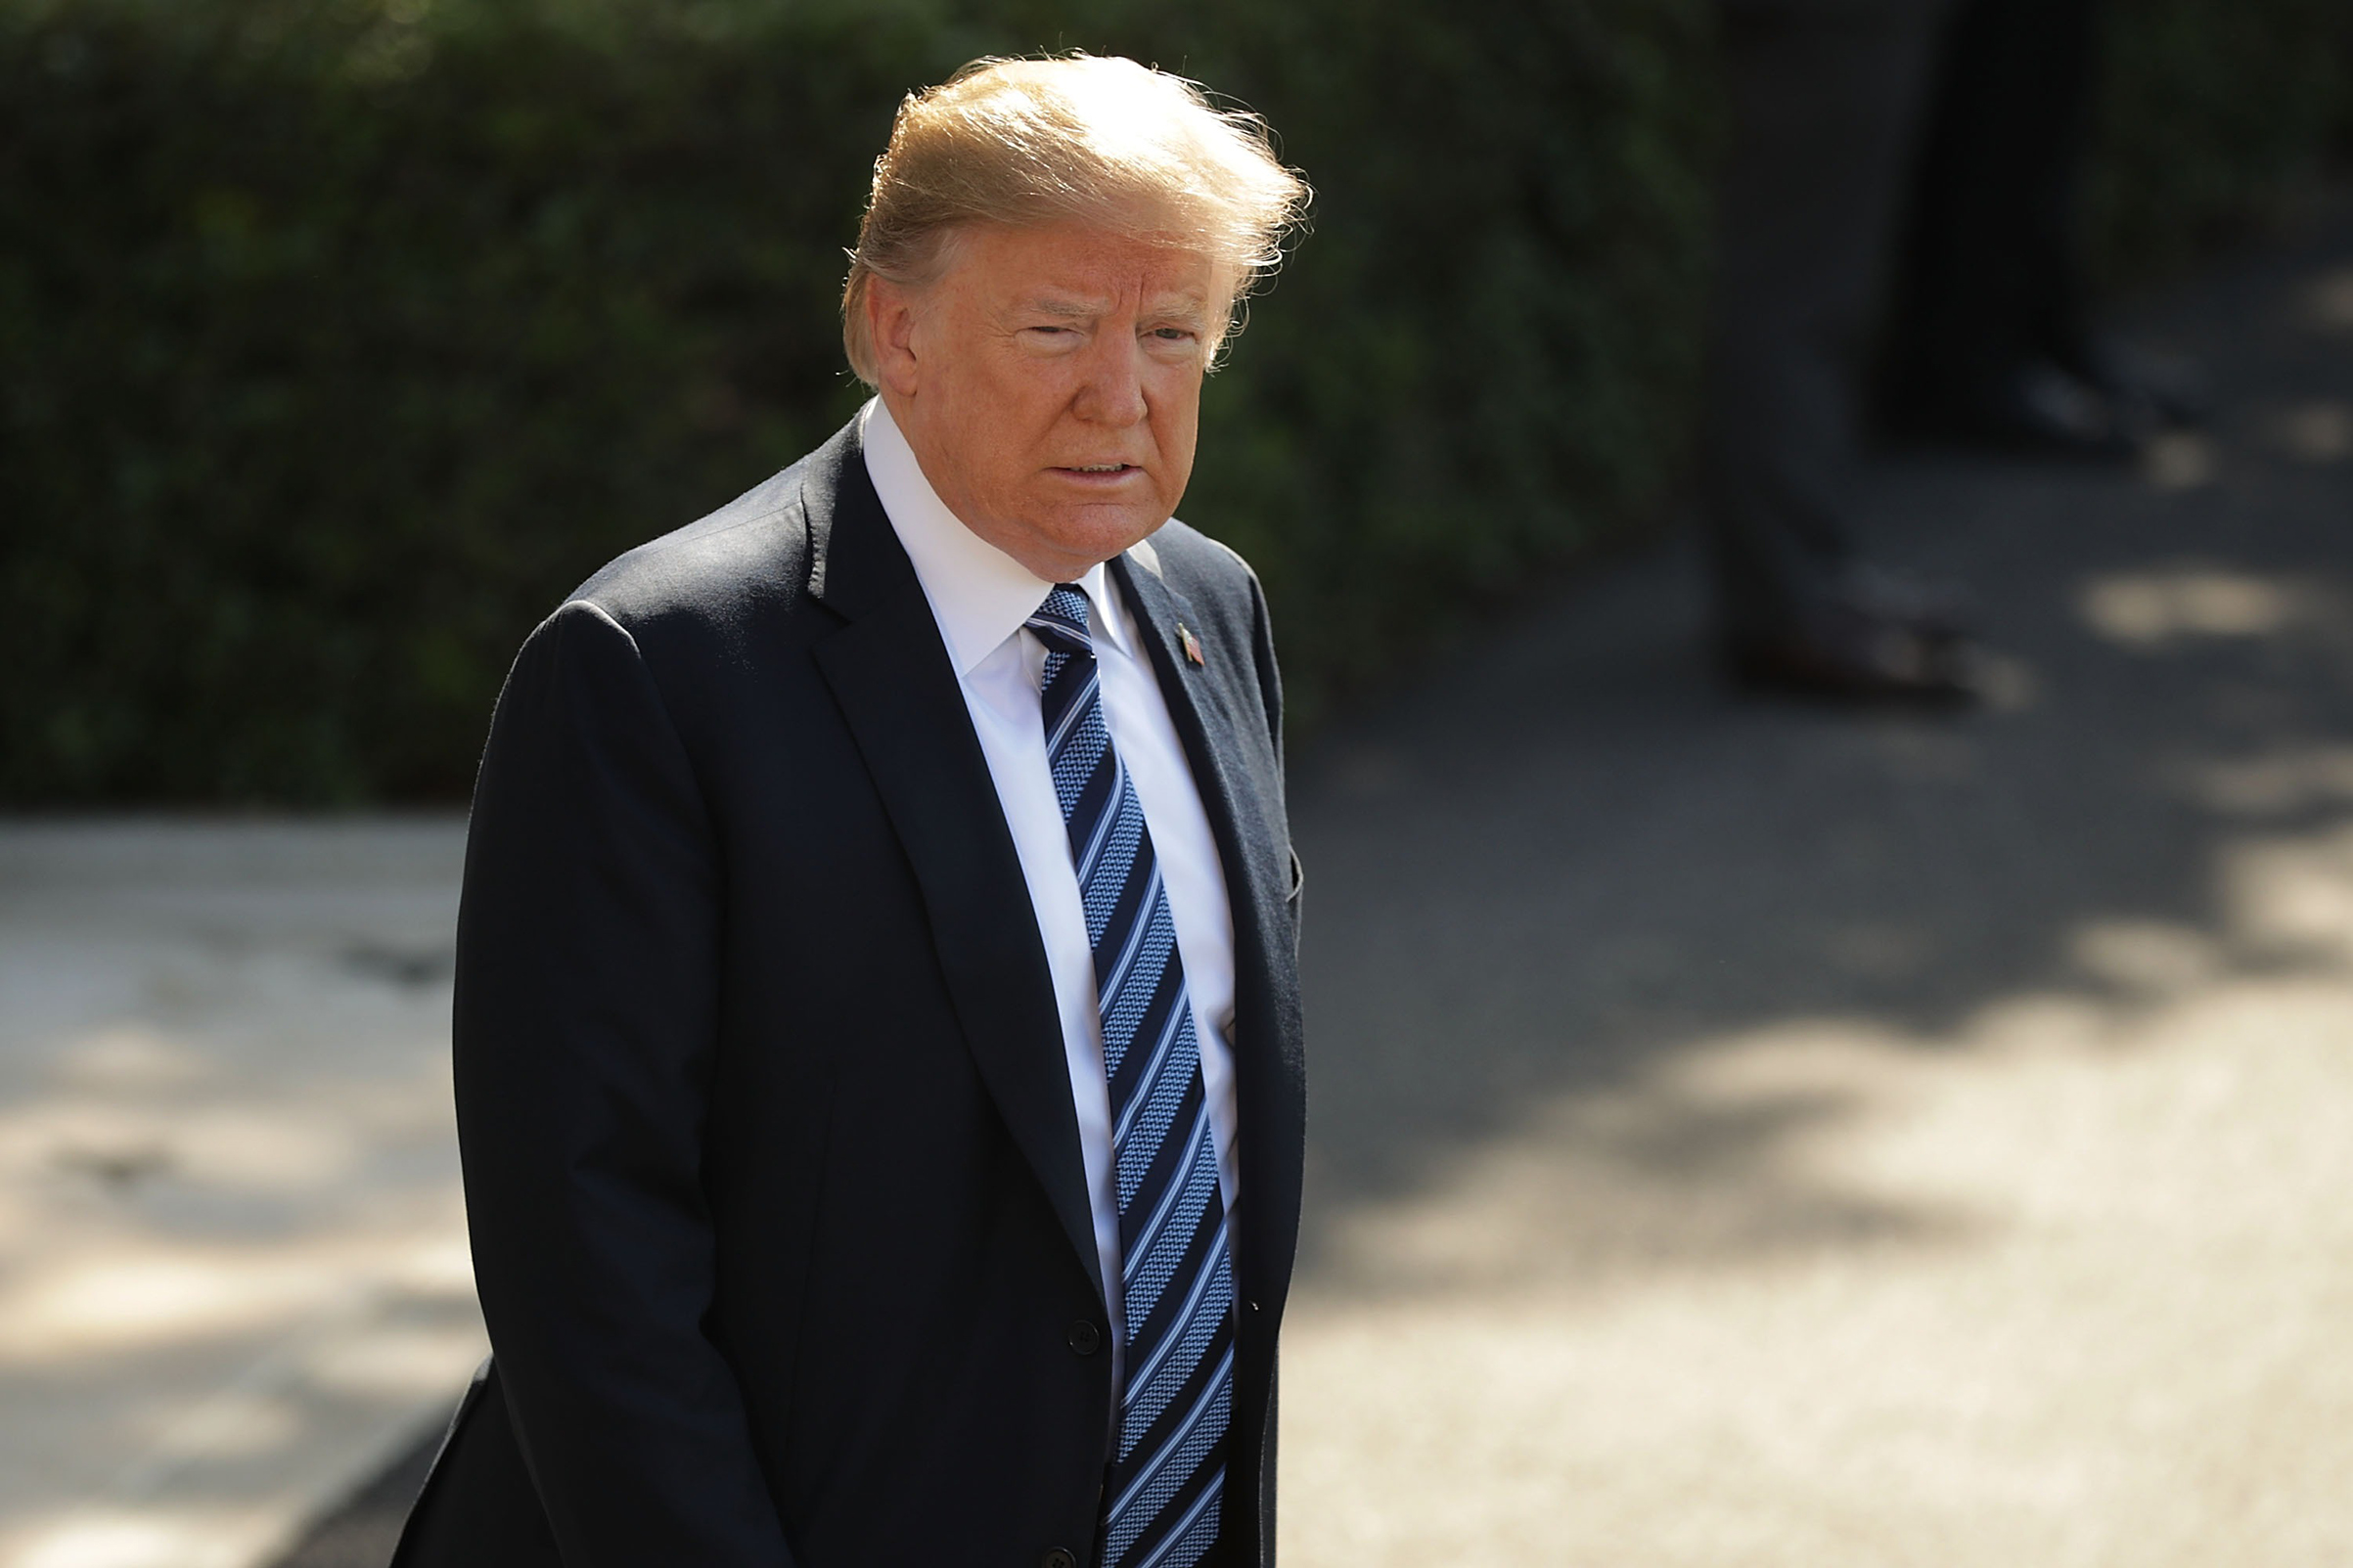 U.S. President Donald Trump departs the White House May 25, 2018 in Washington, DC. Trump is traveling to Annapolis, Maryland, to participate in the Naval Academy's graduation ceremony (Chip Somodevilla—Getty Images)